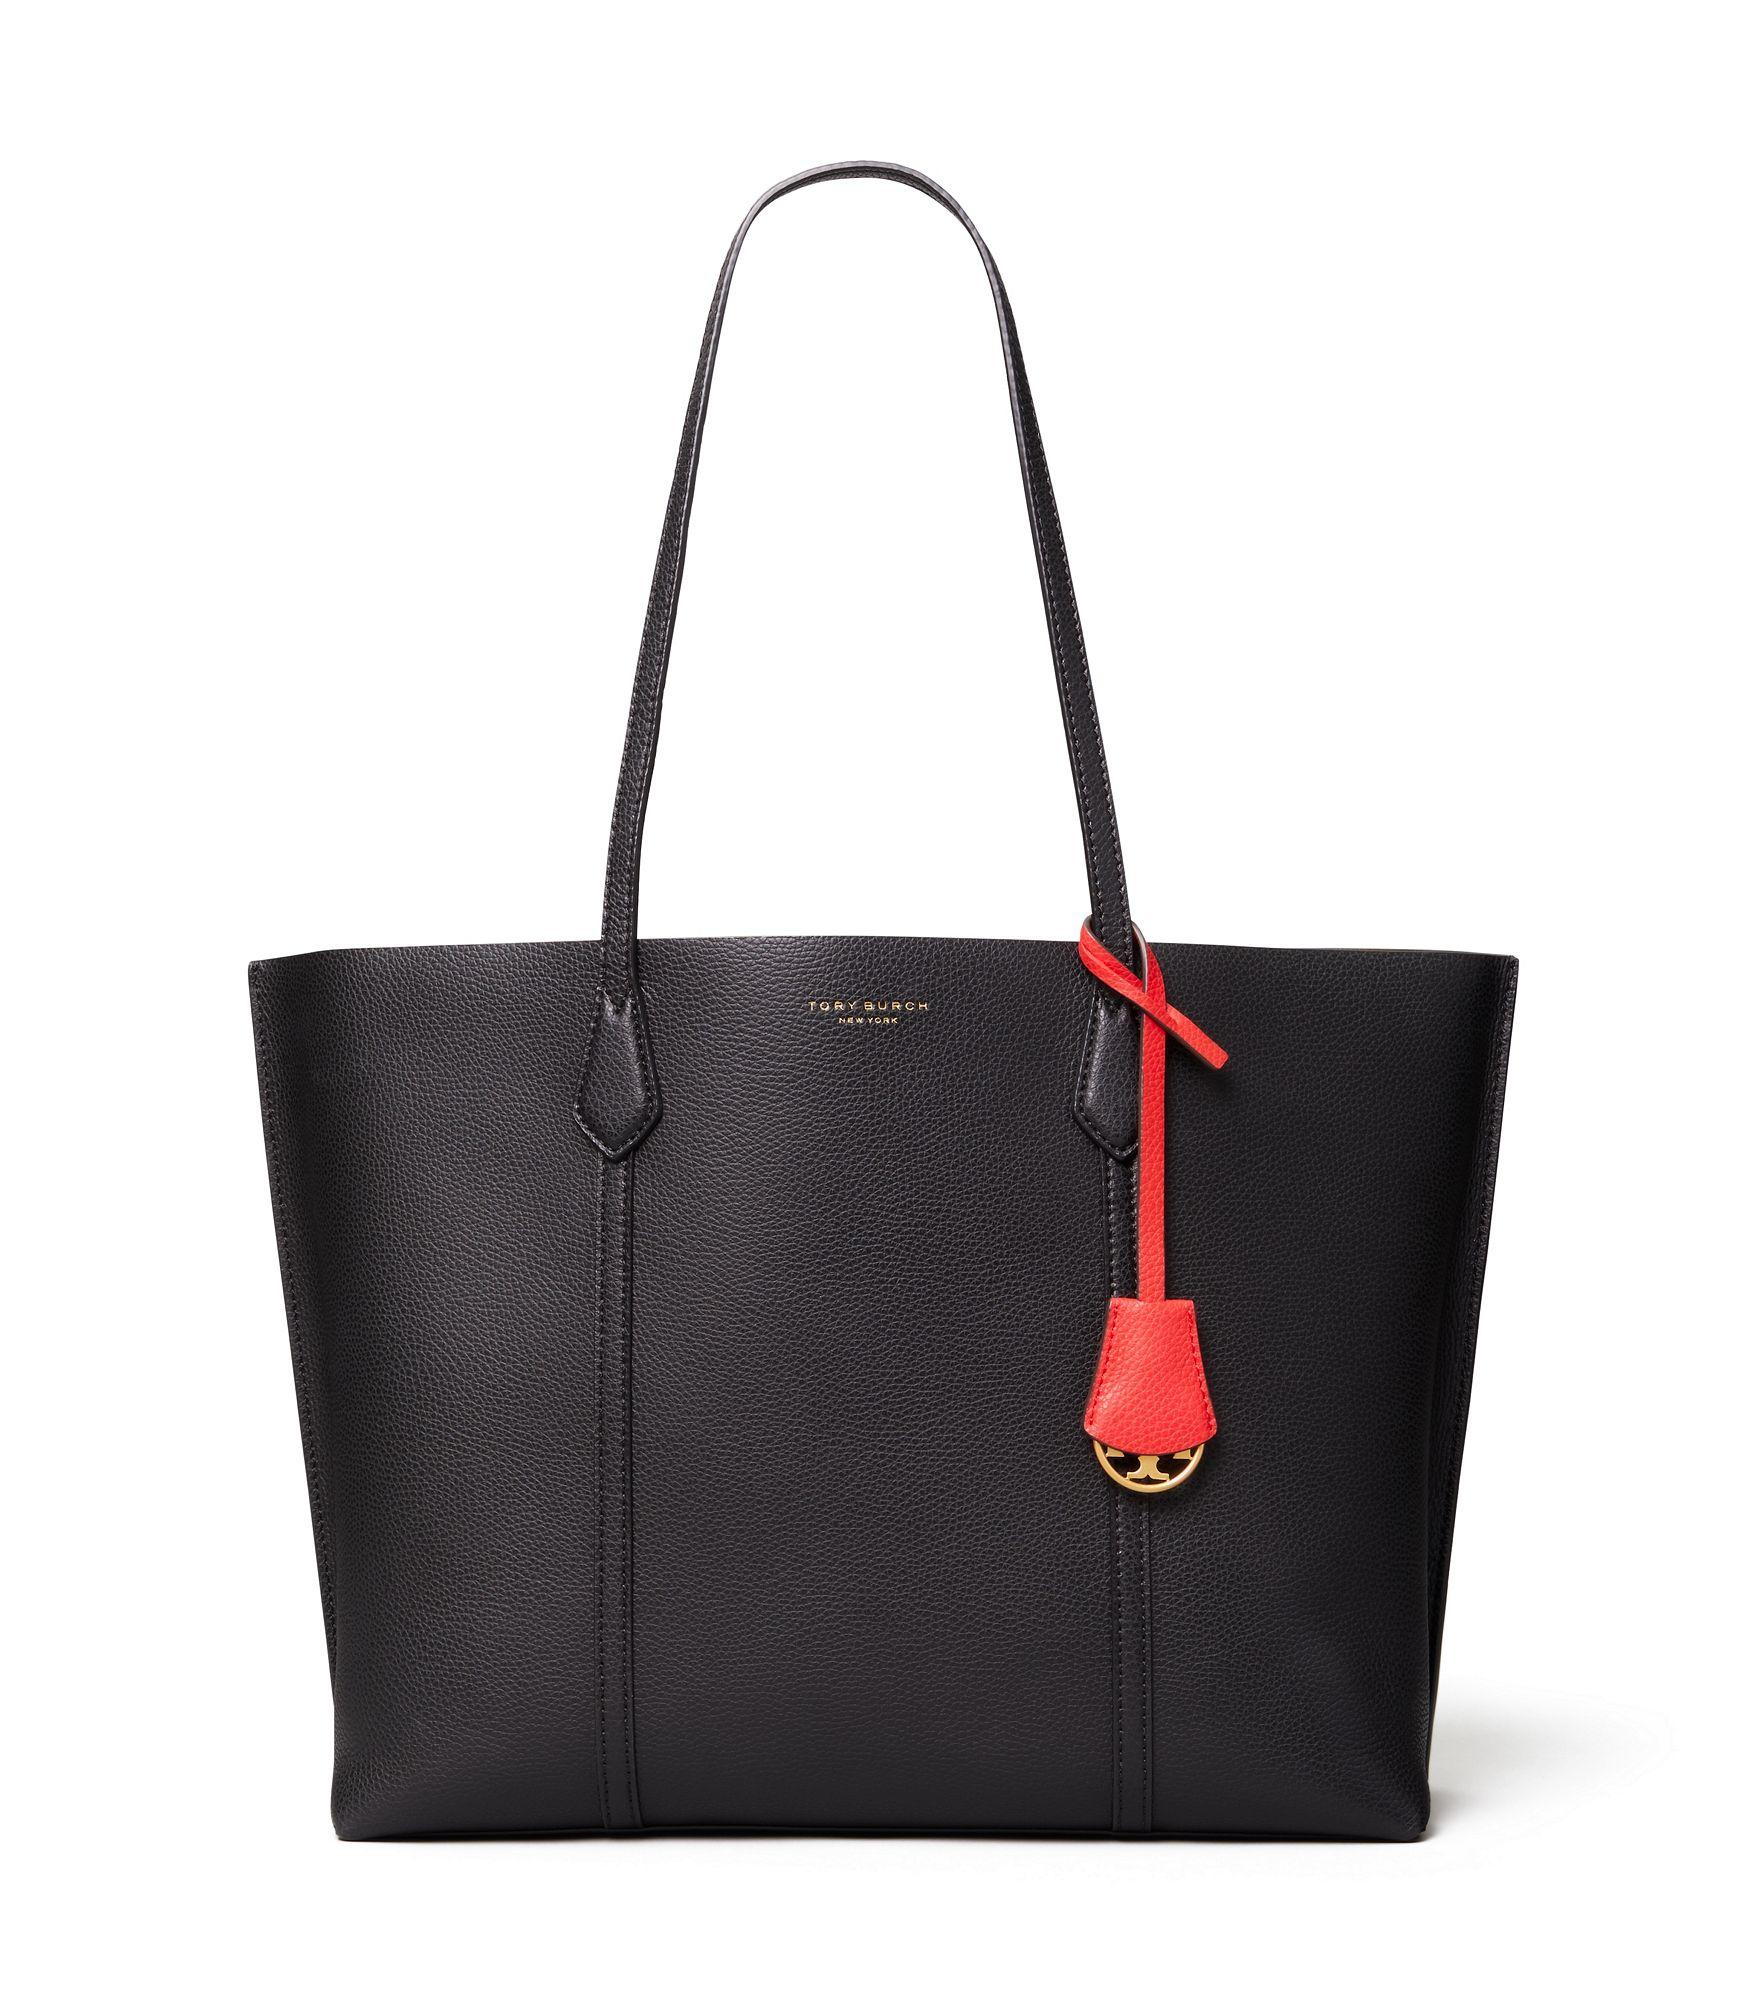 Tory Burch Perry Triple Black Leather Tote Bag - Save 35% - Lyst